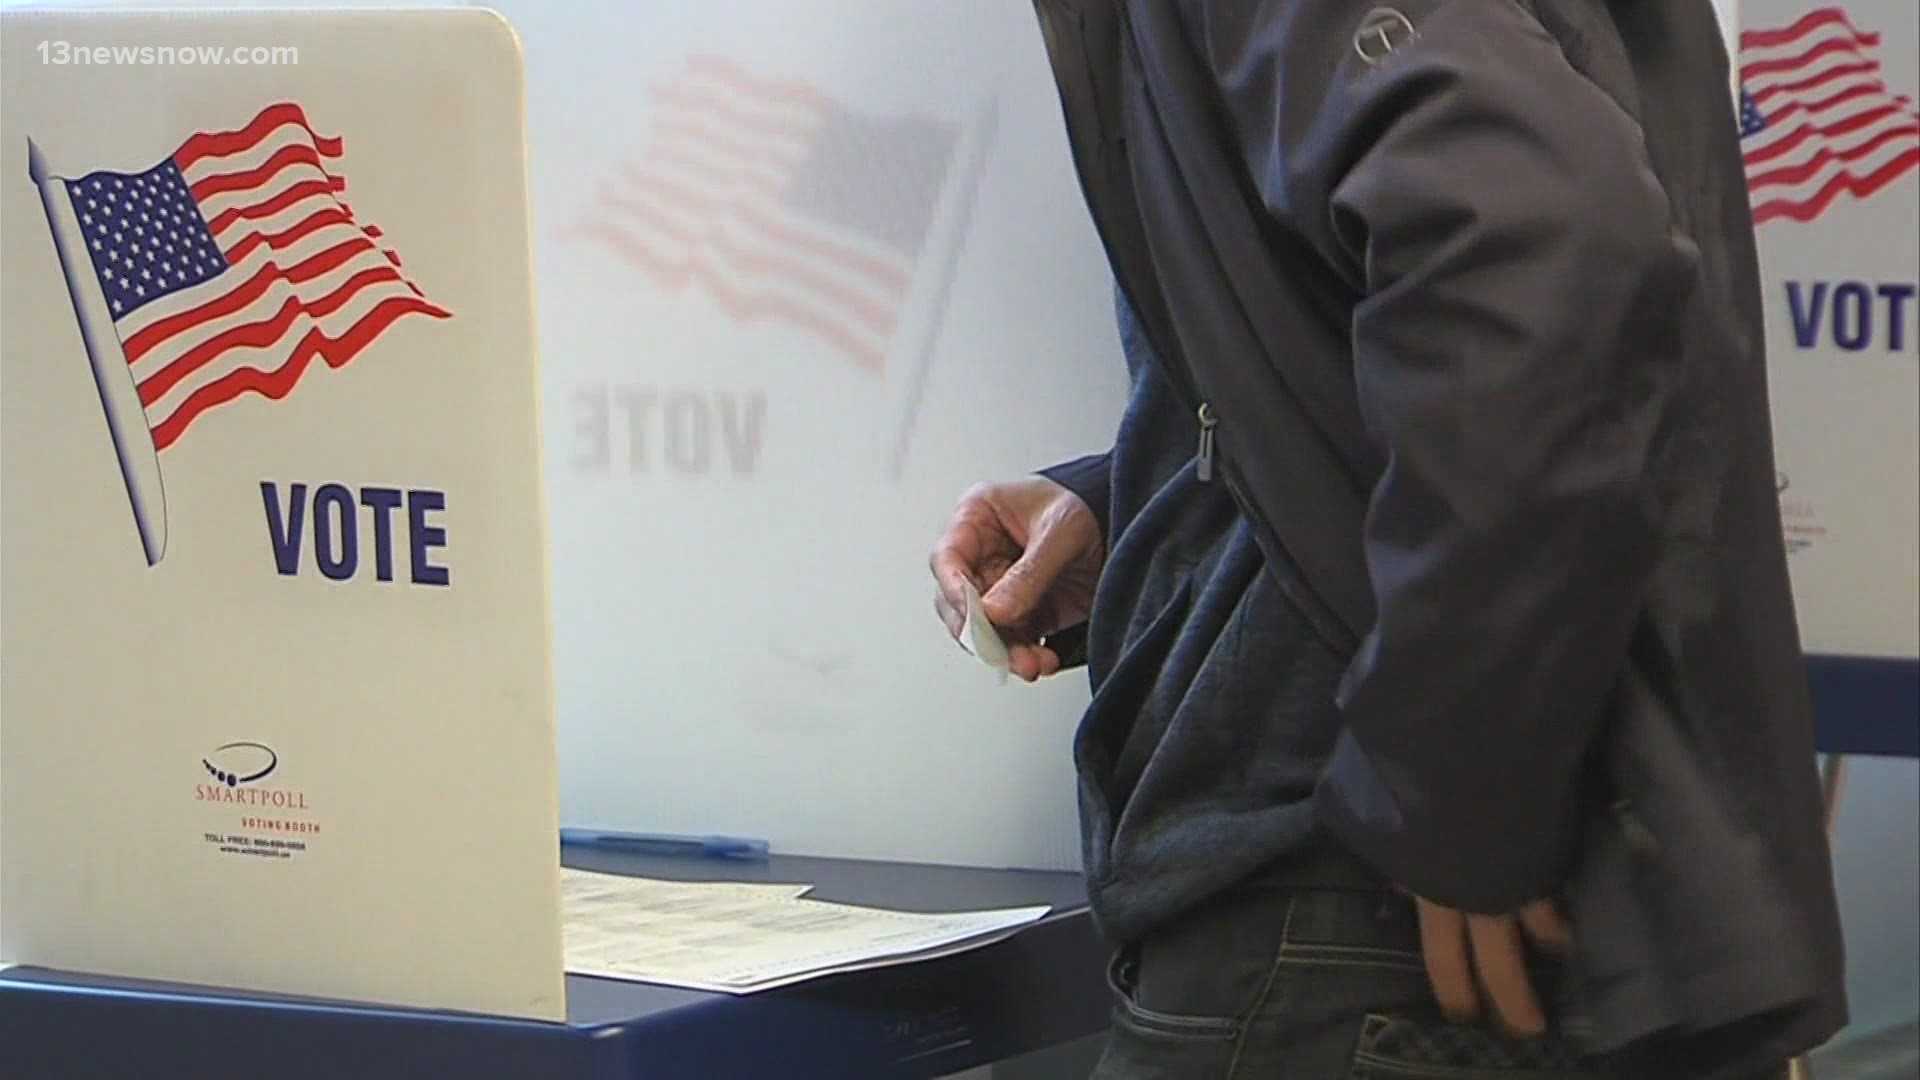 The "For the People Act" looks to expand Americans' access to the ballot box.